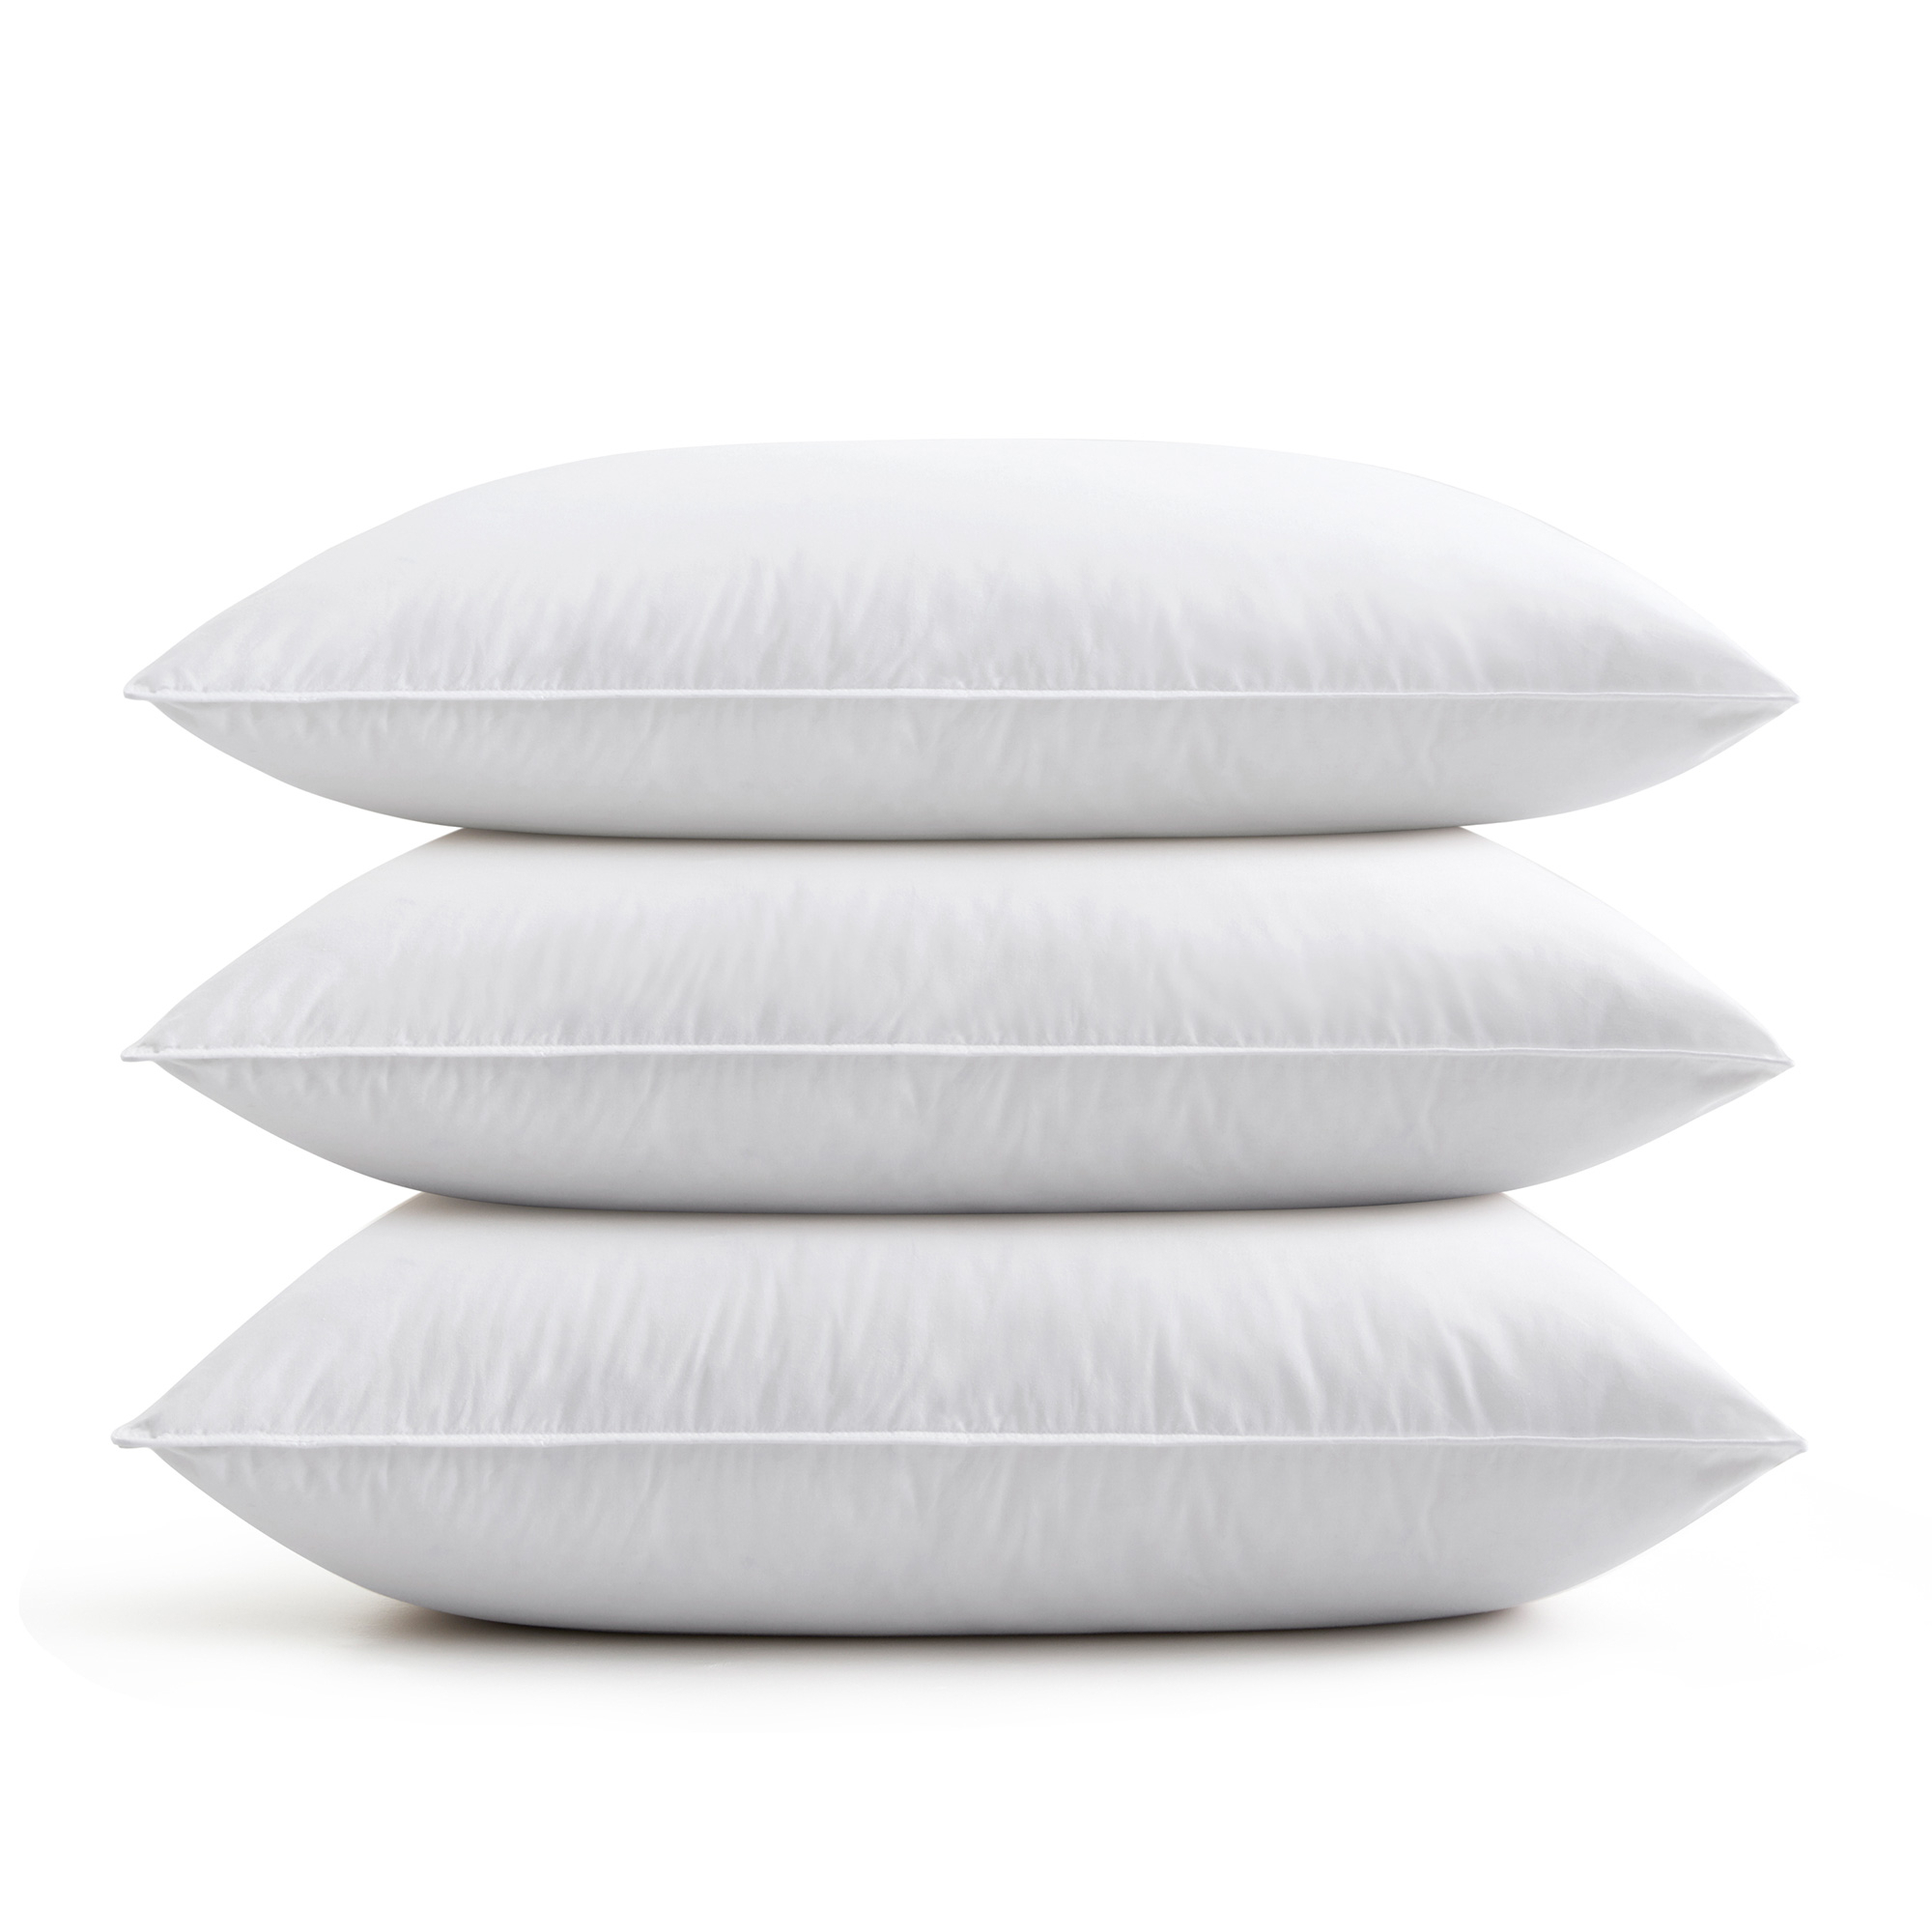 2 Pack Feather Down Pillows with Pillow-in-a-pillow Design, Downproof Cotton Shell 300 Thread Count, Available in 3 Densities, Soft, Medium - White,